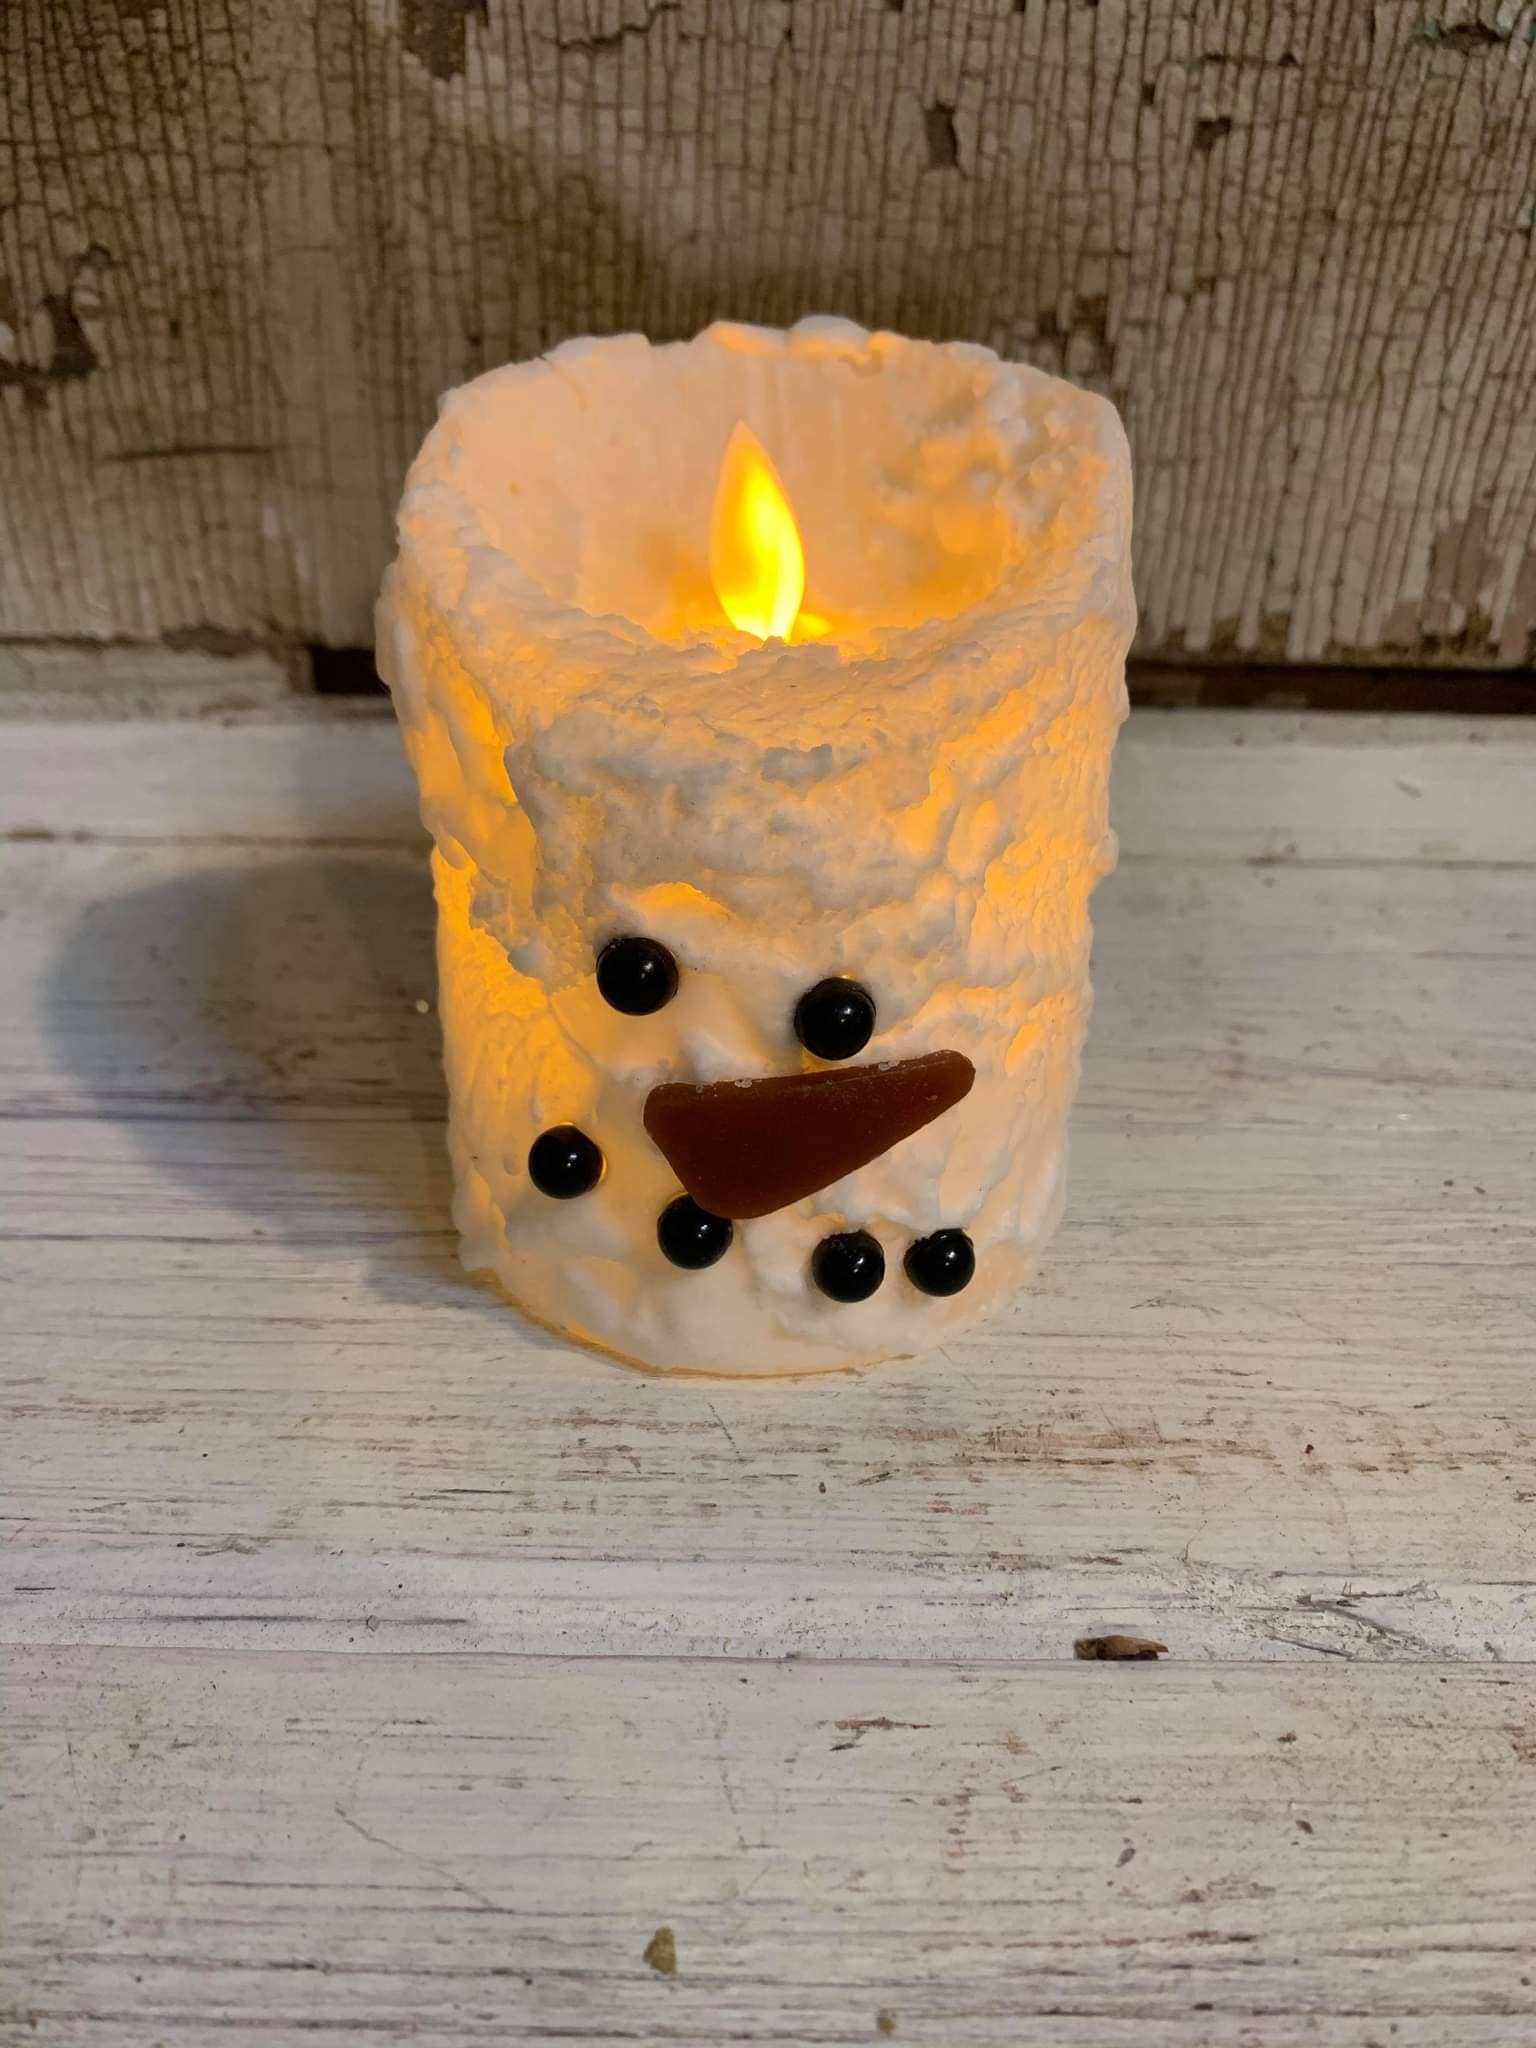 Wholesale Home Decor - Snowman Bumpy White Moving Flame LED Candle 3in by 4in (7802953367779)